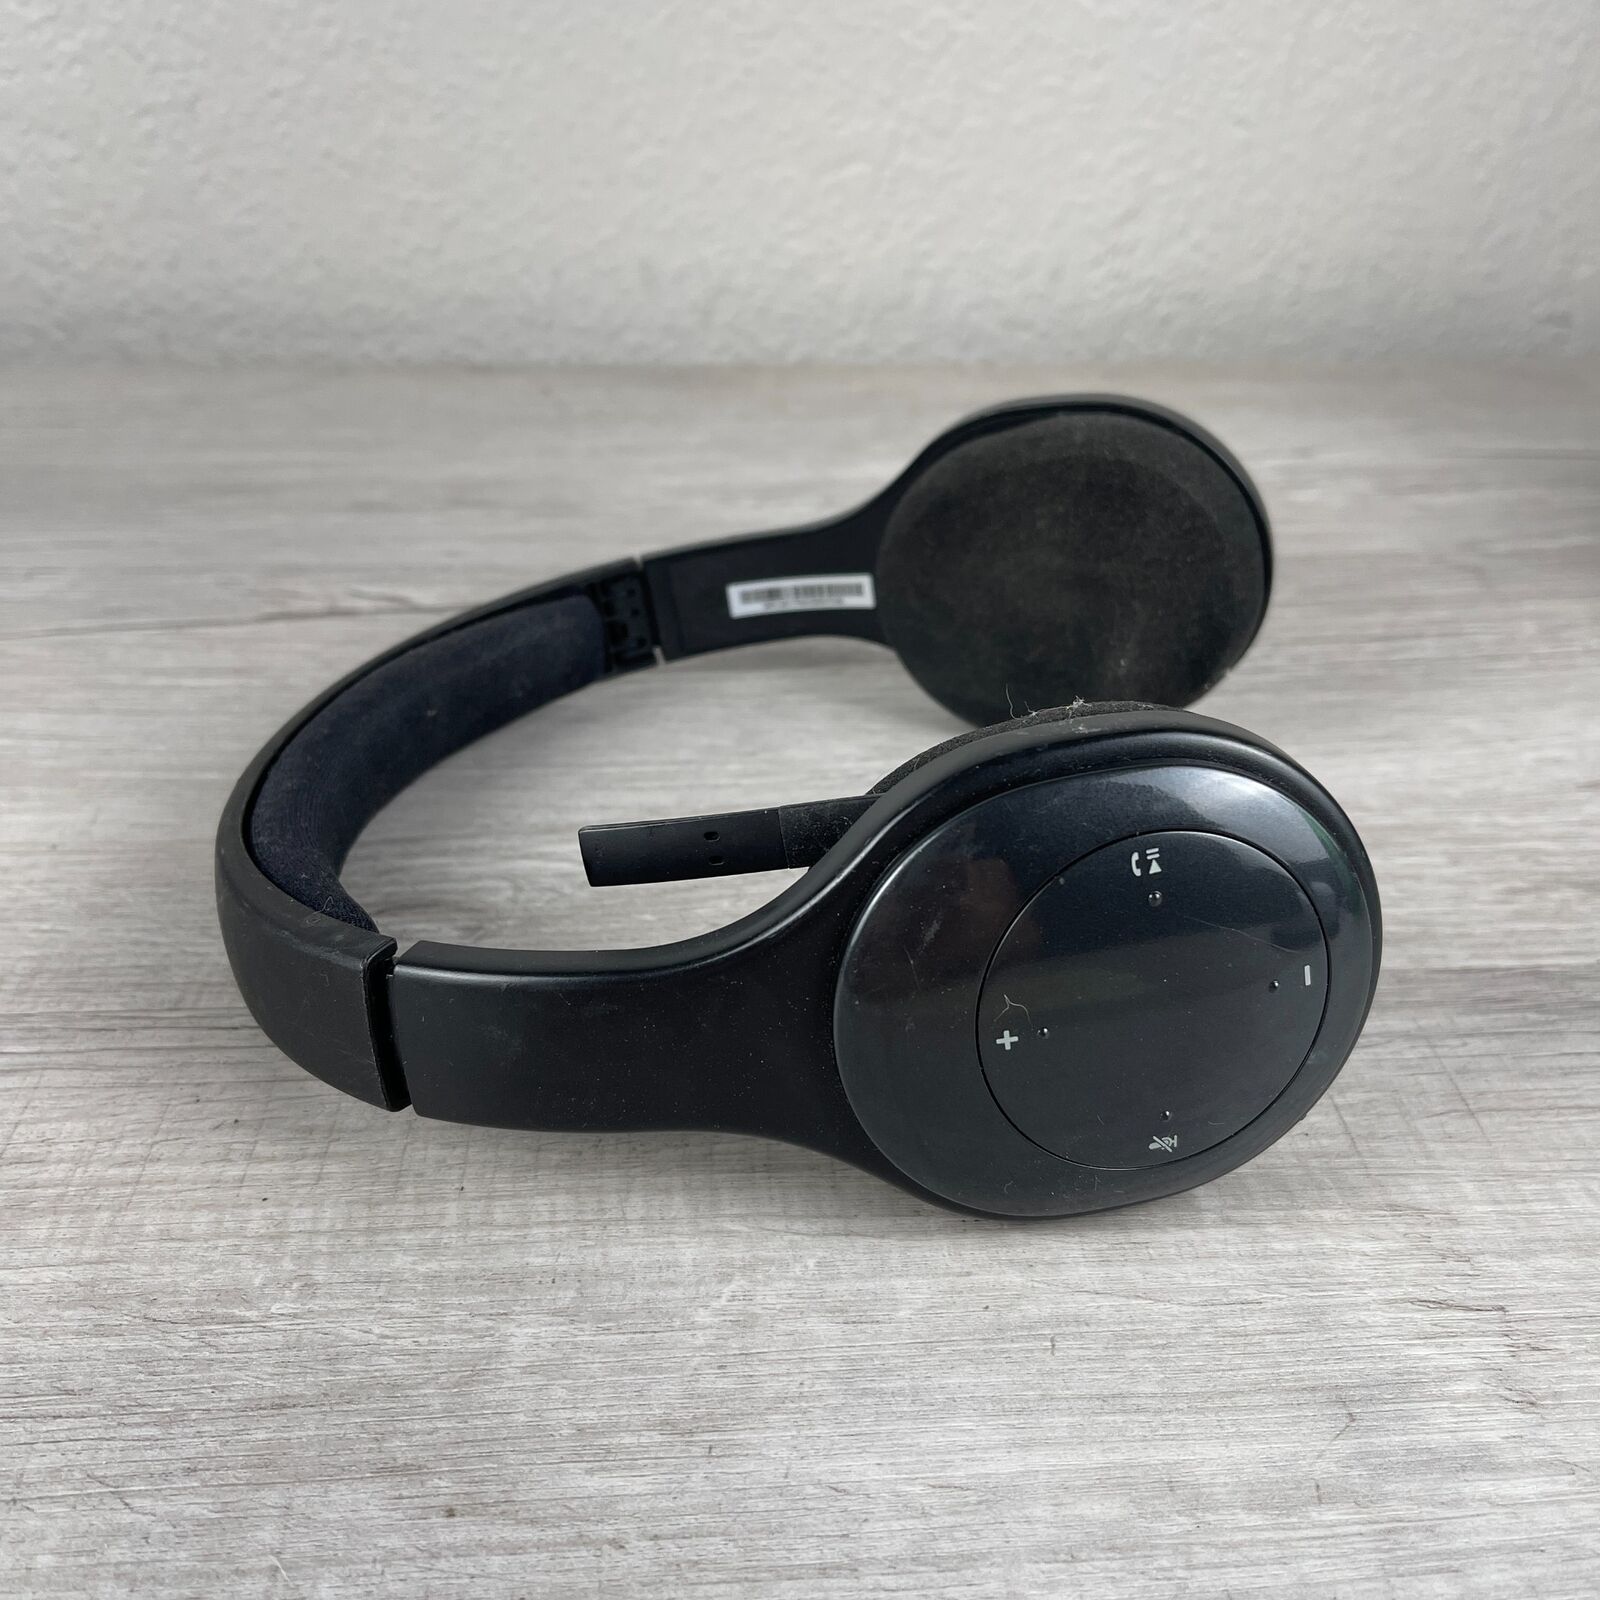 Logitech Black Wireless Bluetooth Enabled Noise-Cancelling Over Ear Headset